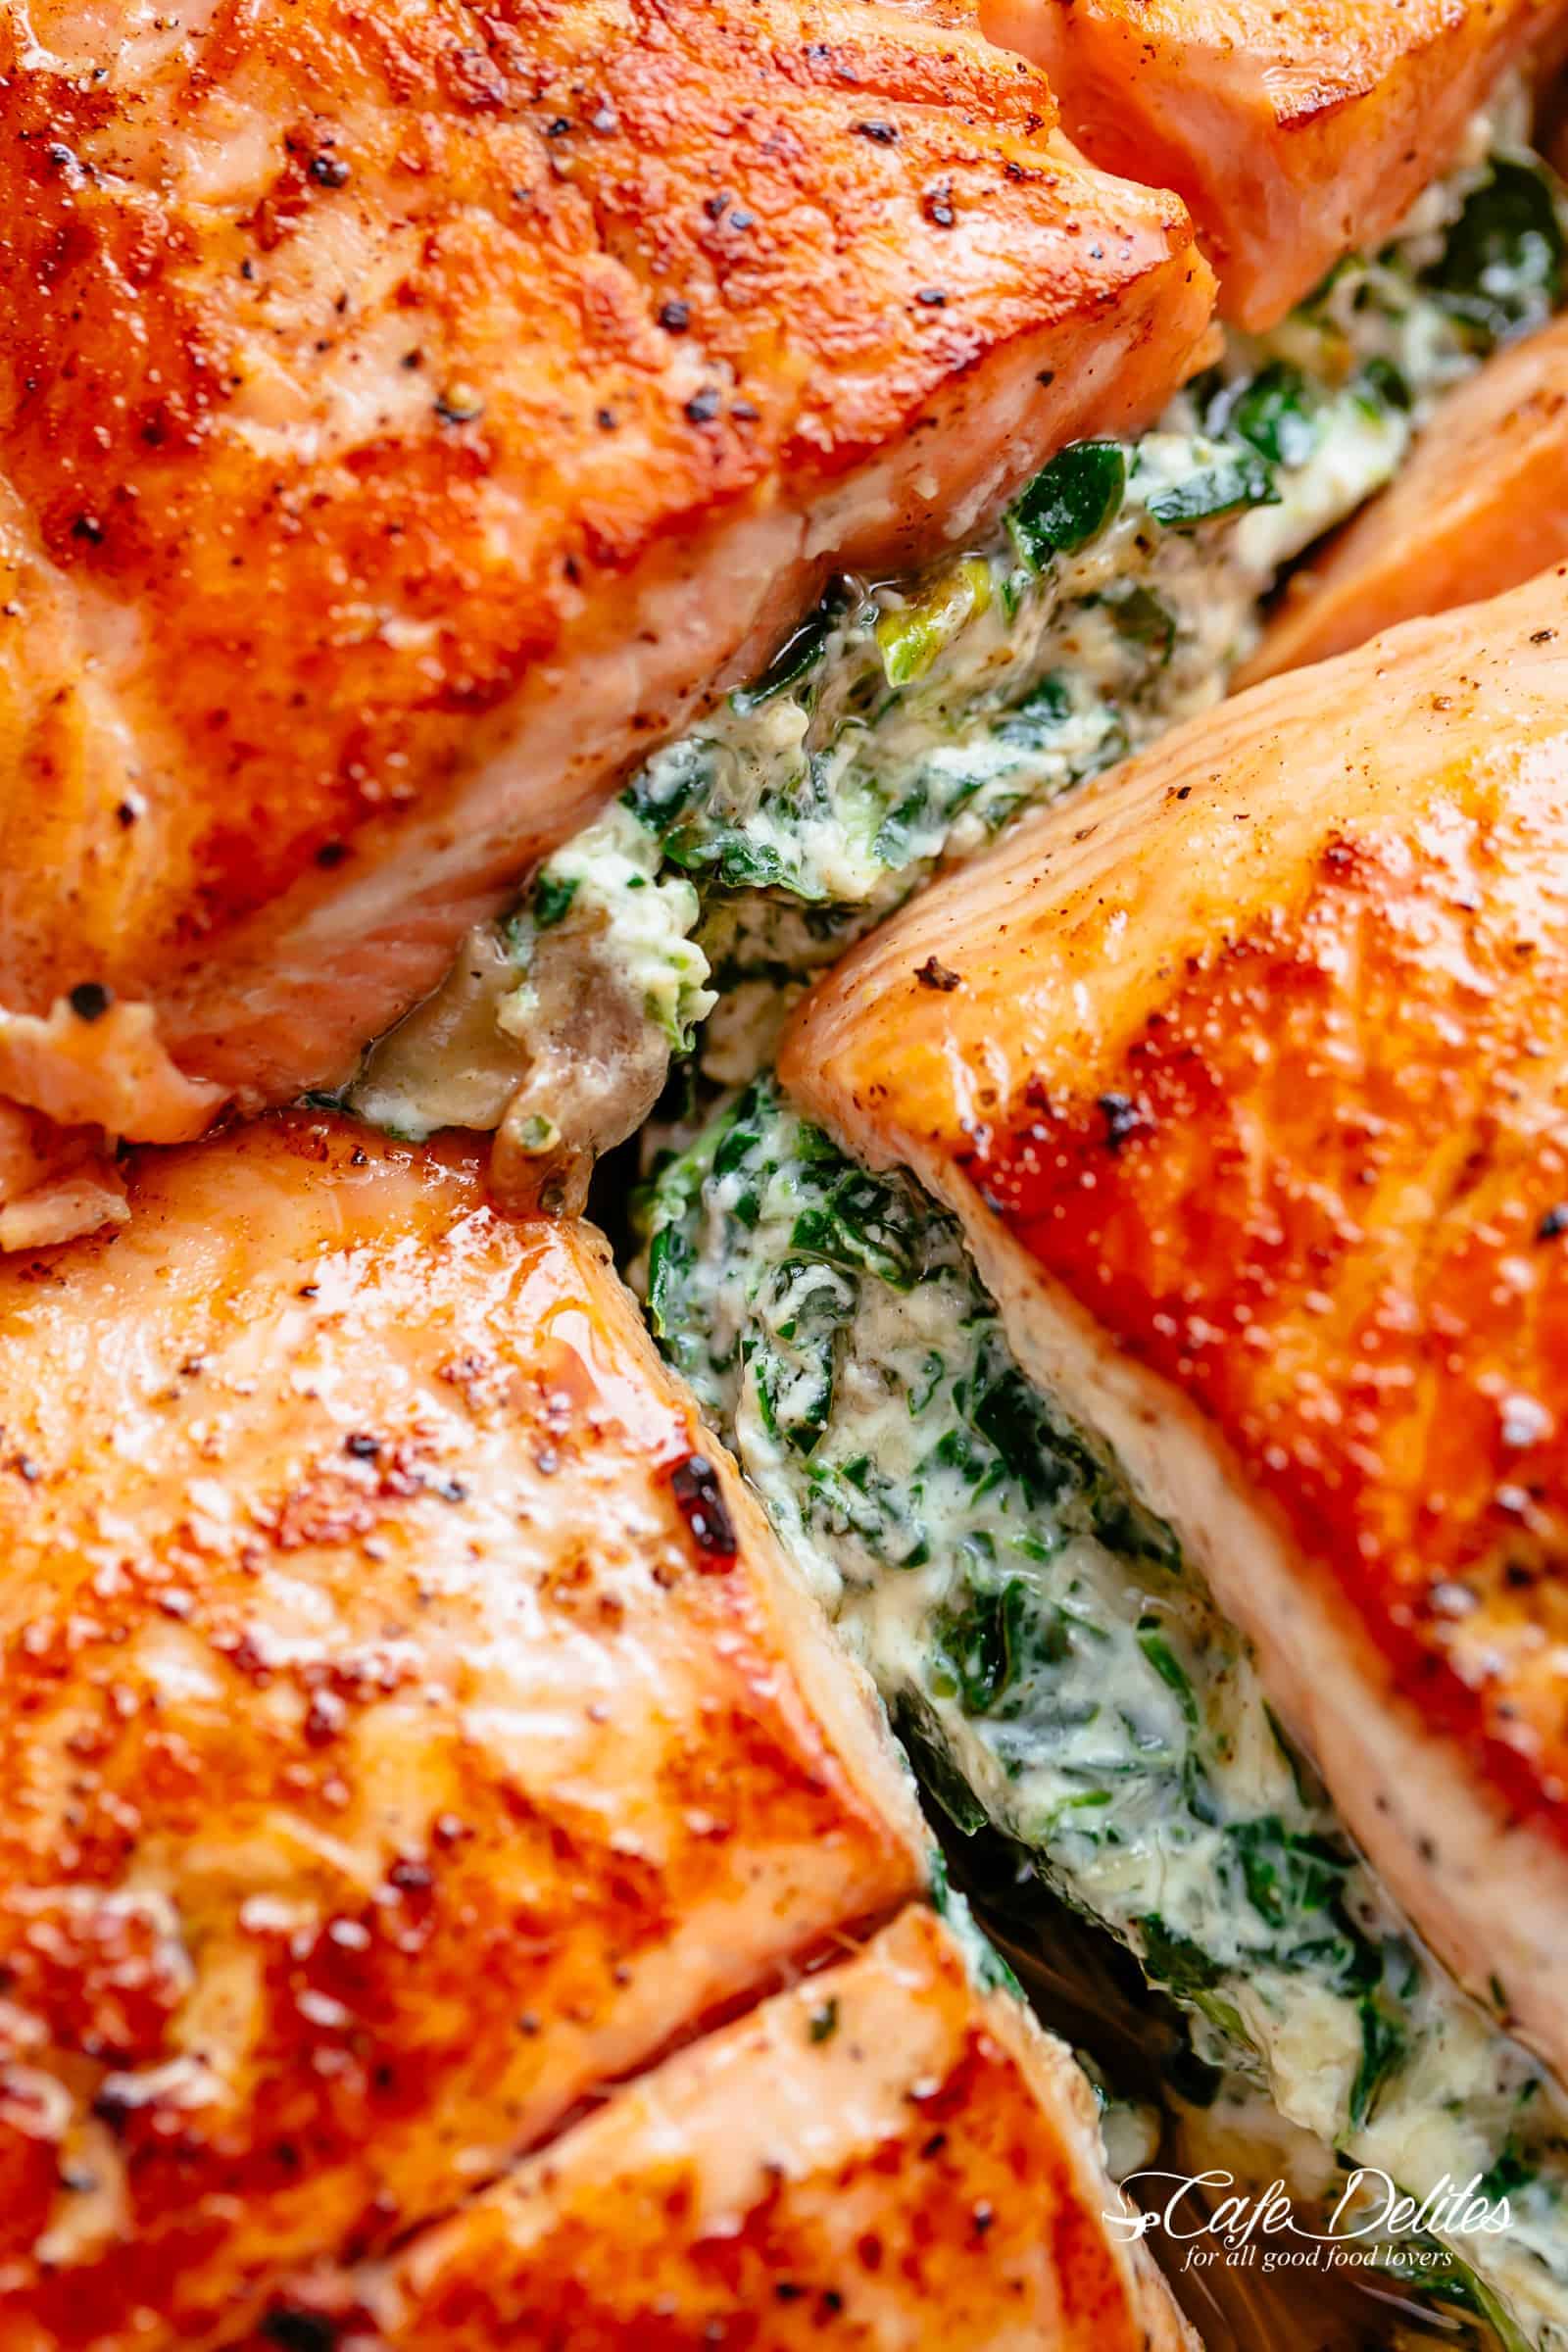 Creamy Spinach Stuffed Salmon in Garlic Butter - Cafe Delites